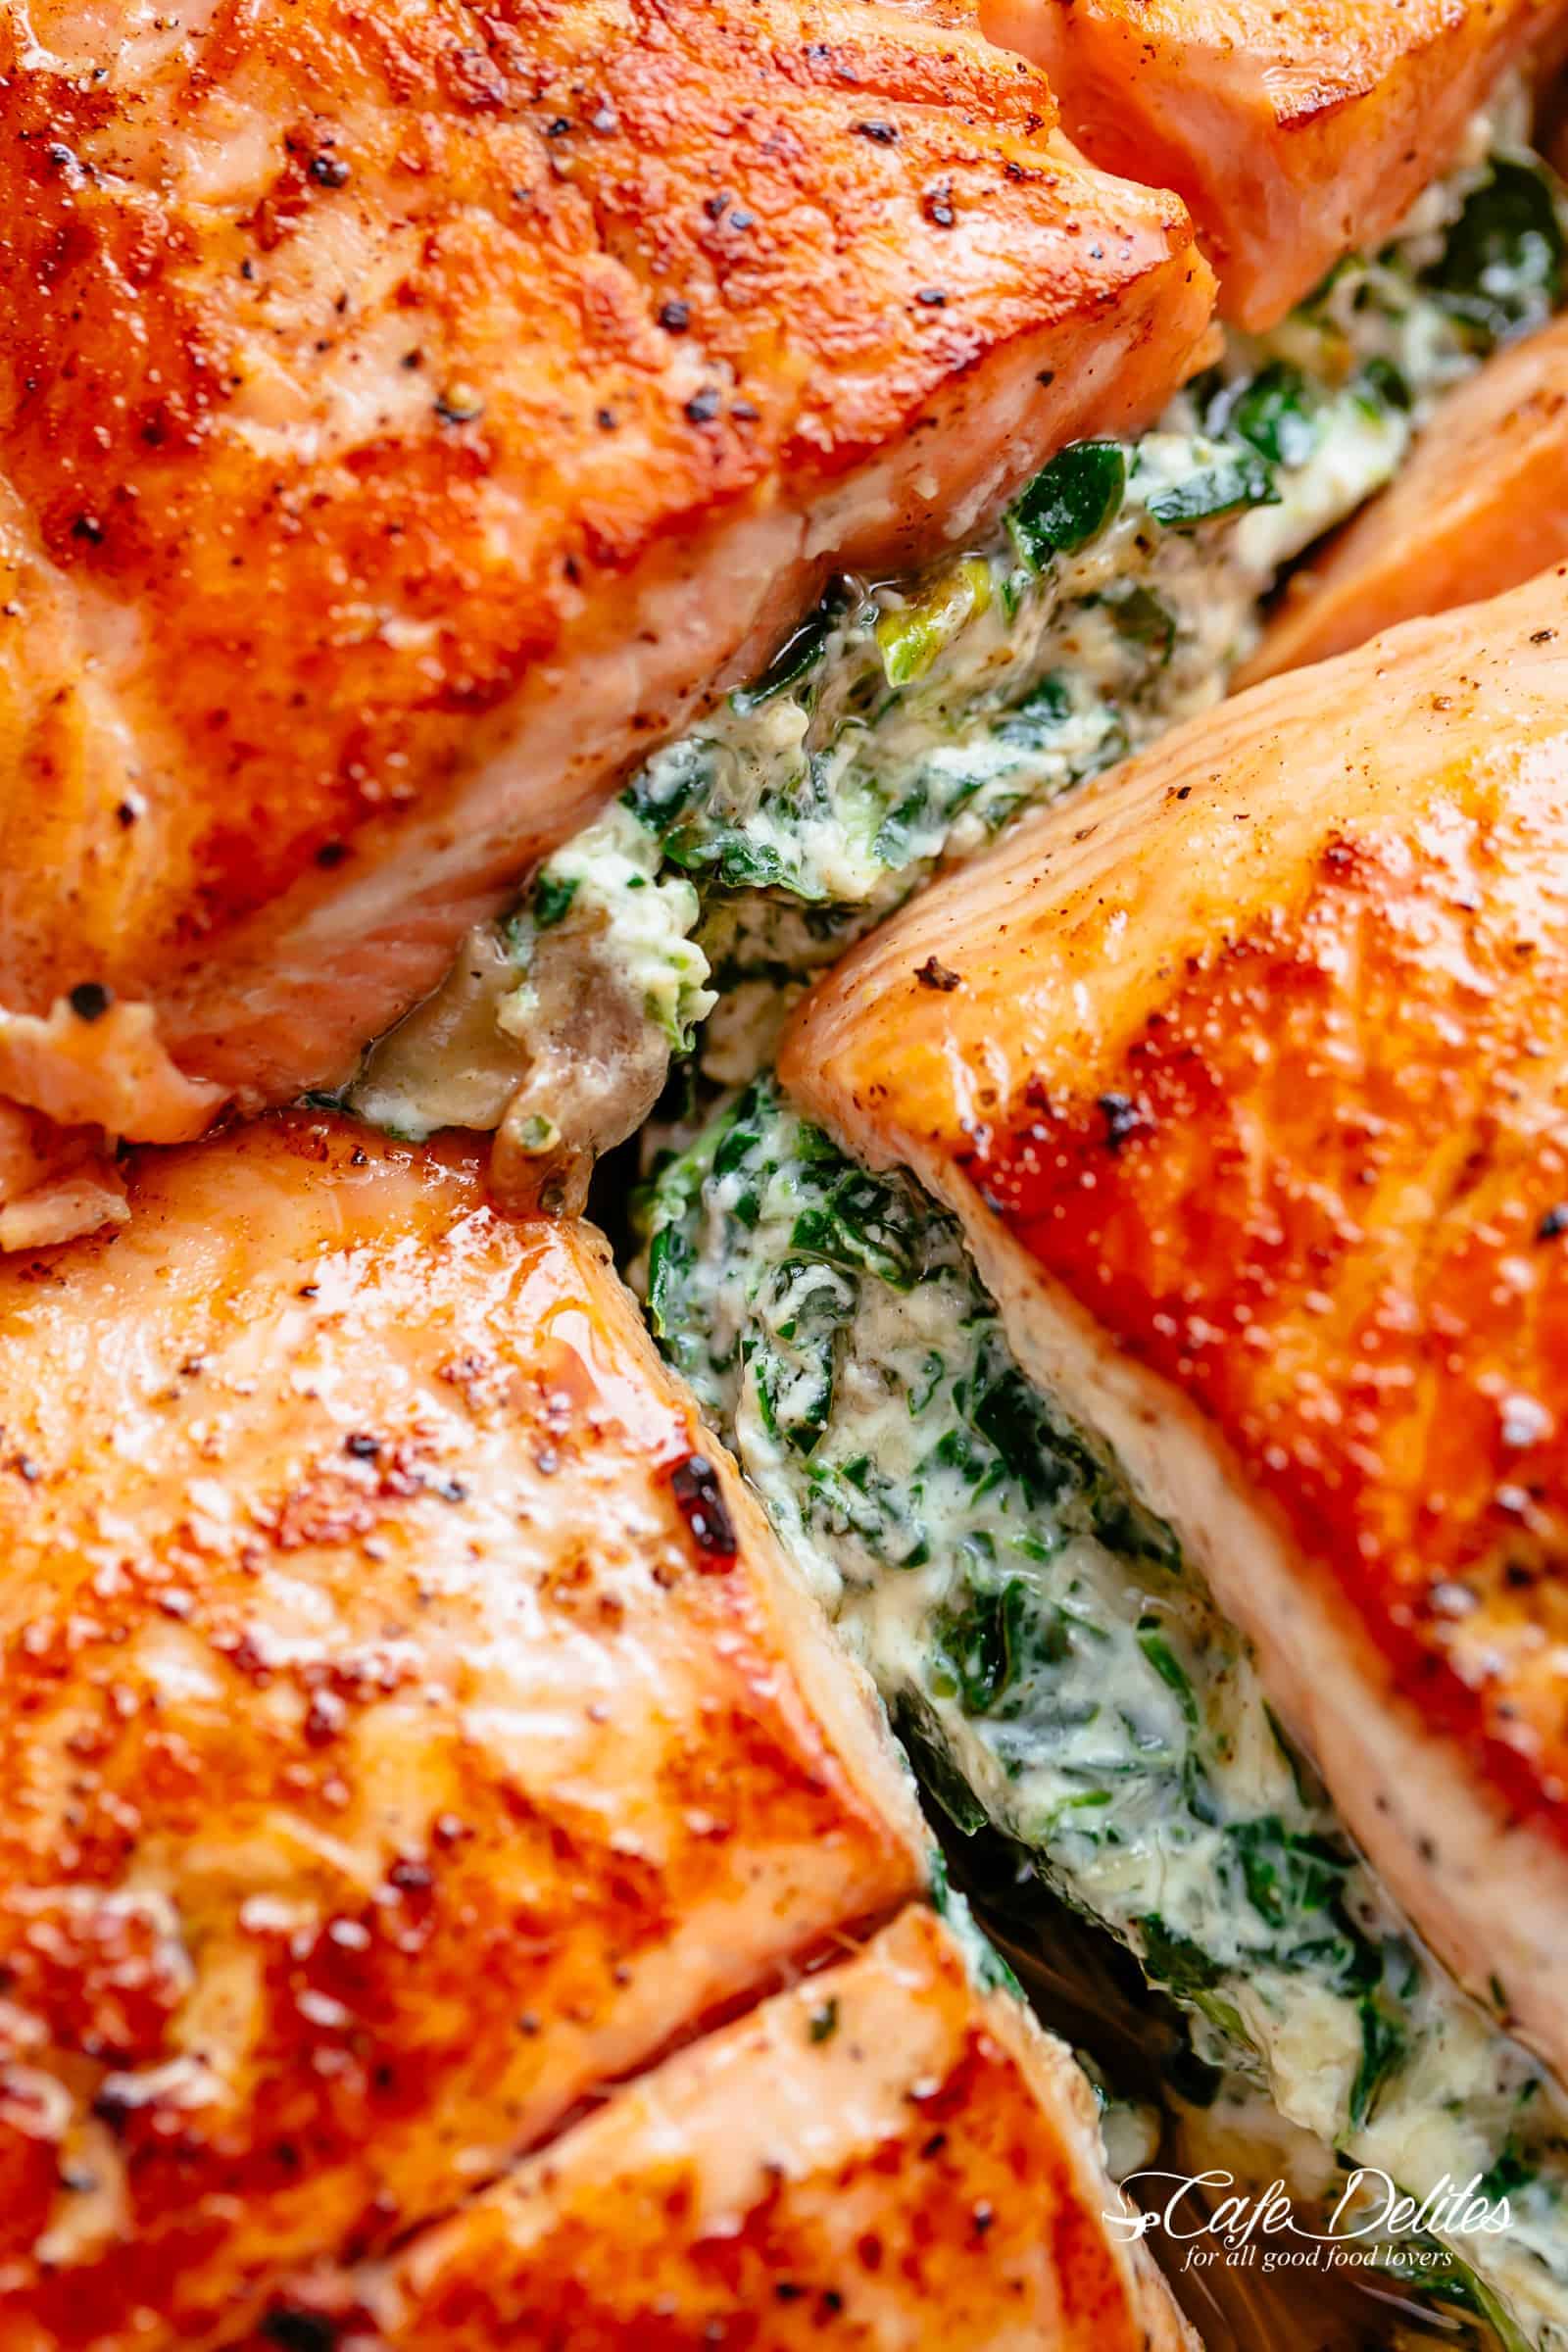 Creamy Spinach Stuffed Salmon in Garlic Butter - Cafe Delites